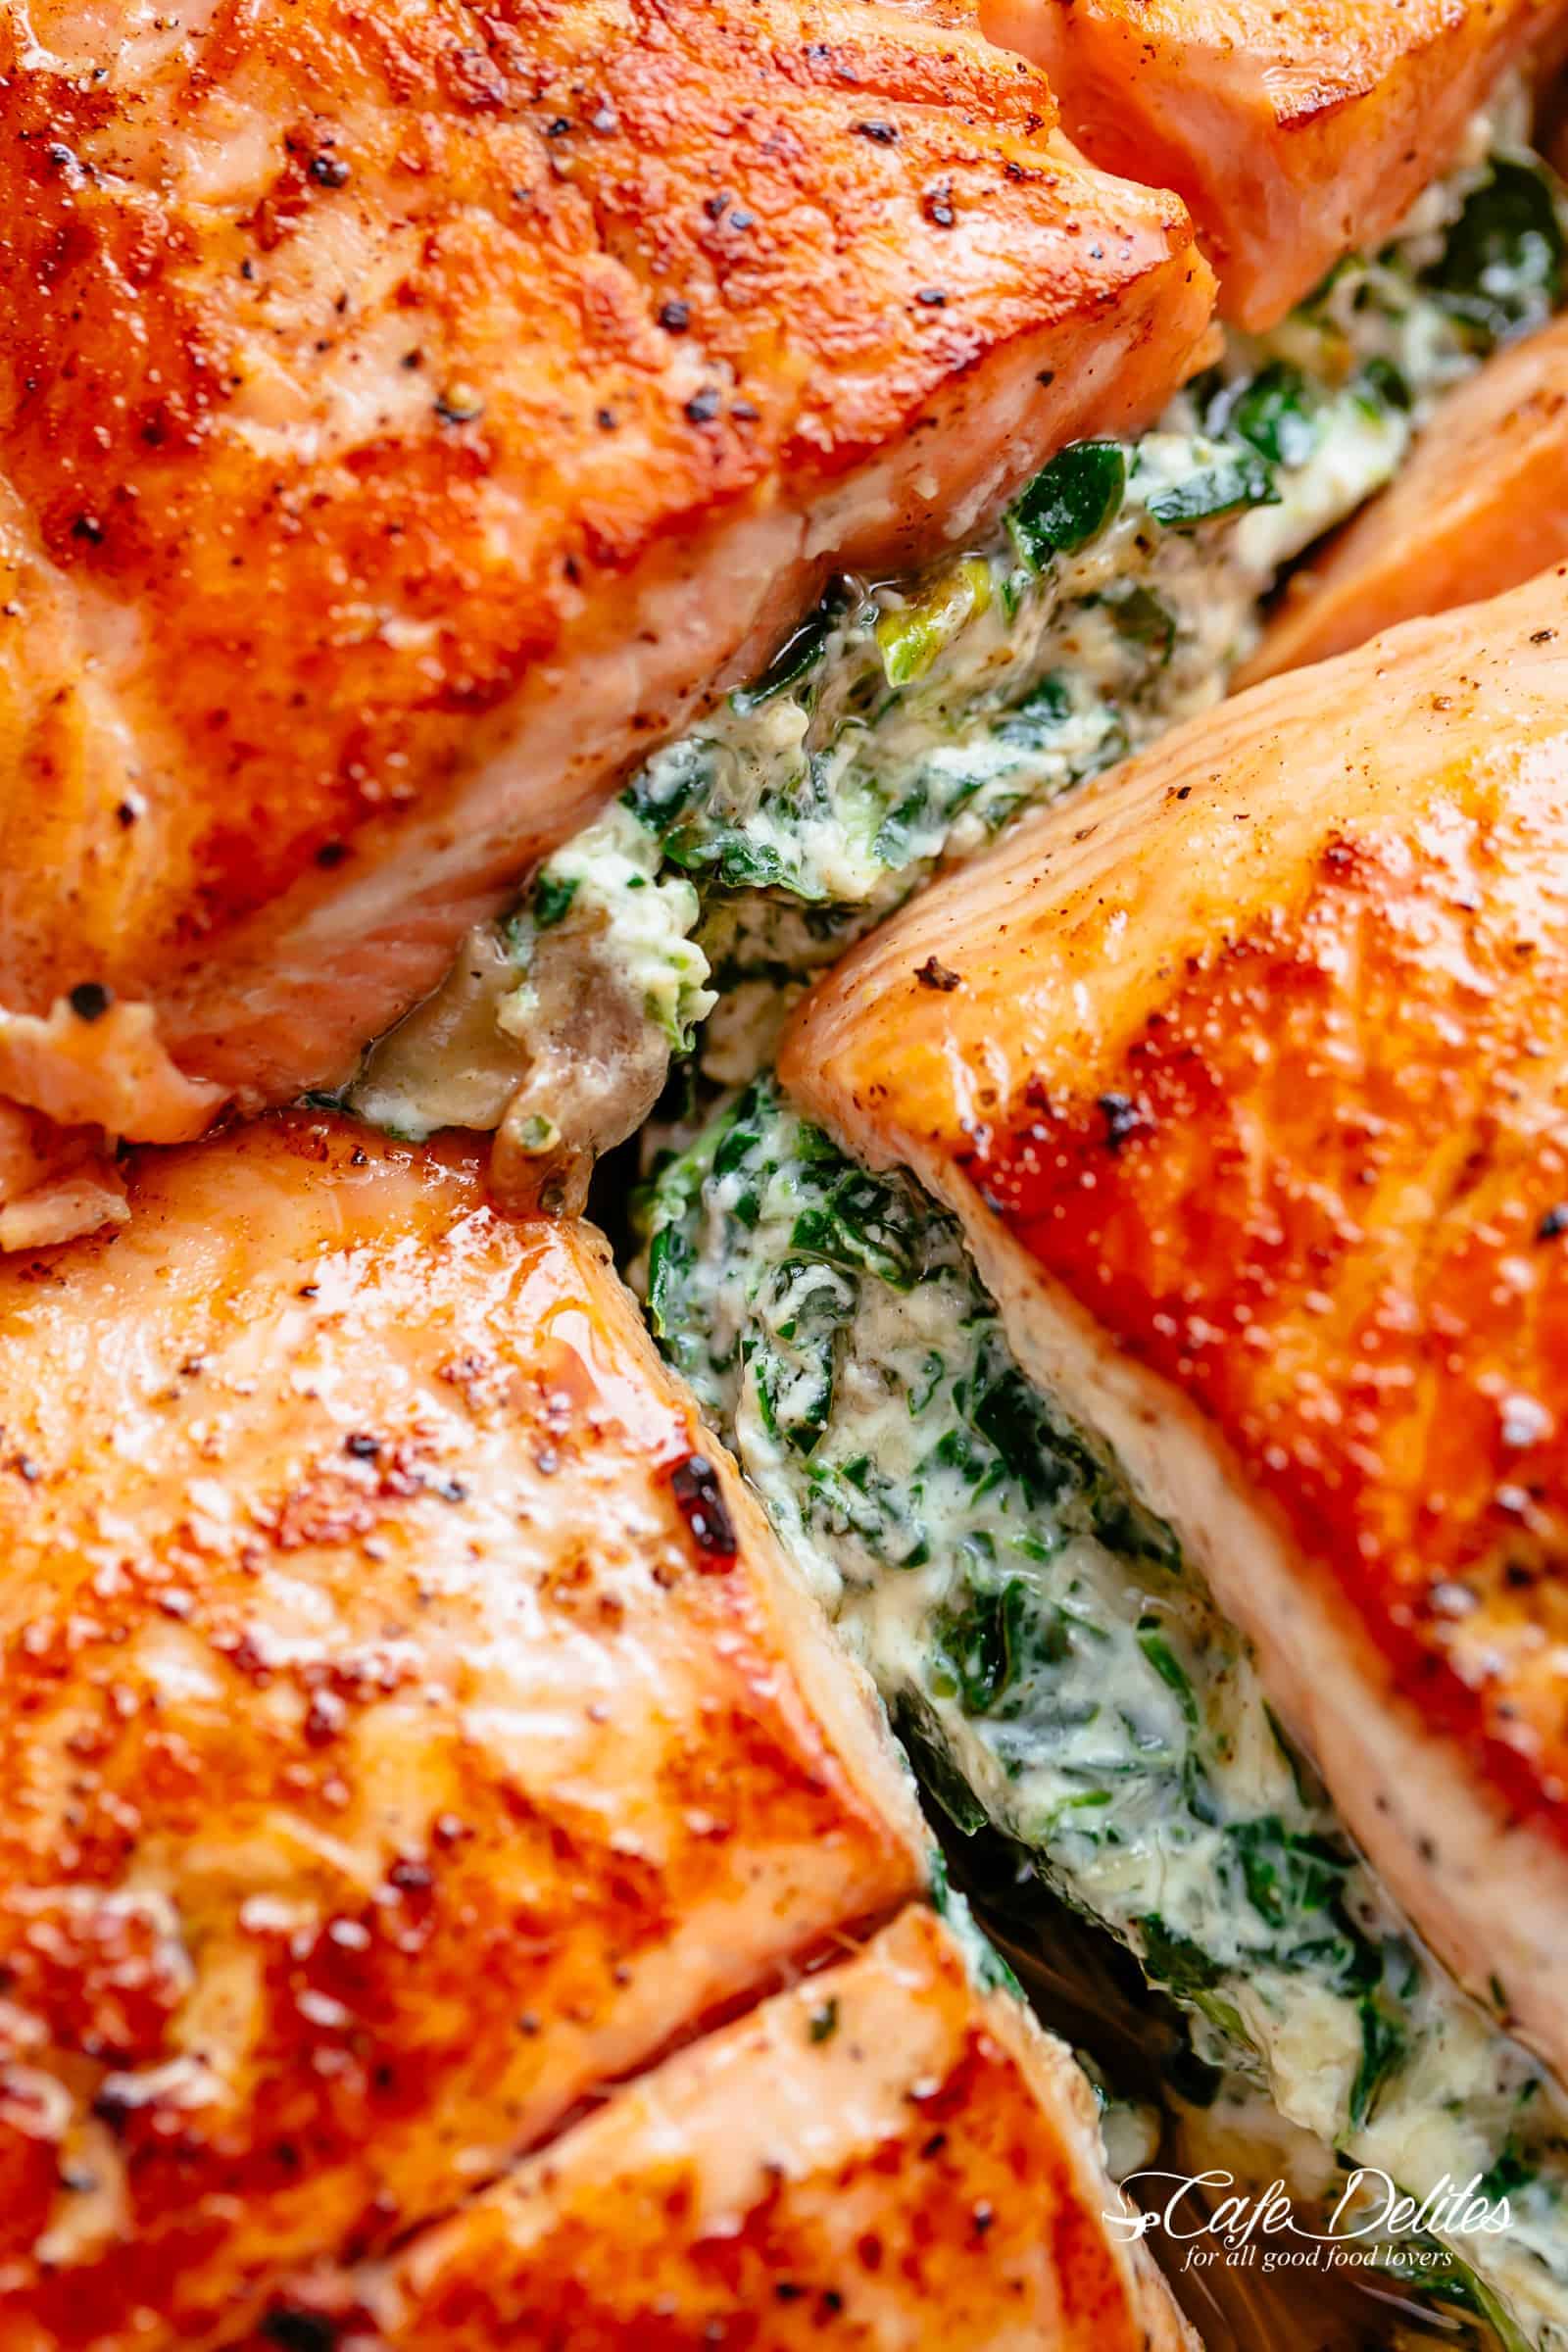 Creamy Spinach Stuffed Salmon in Garlic Butter - Cafe Delites